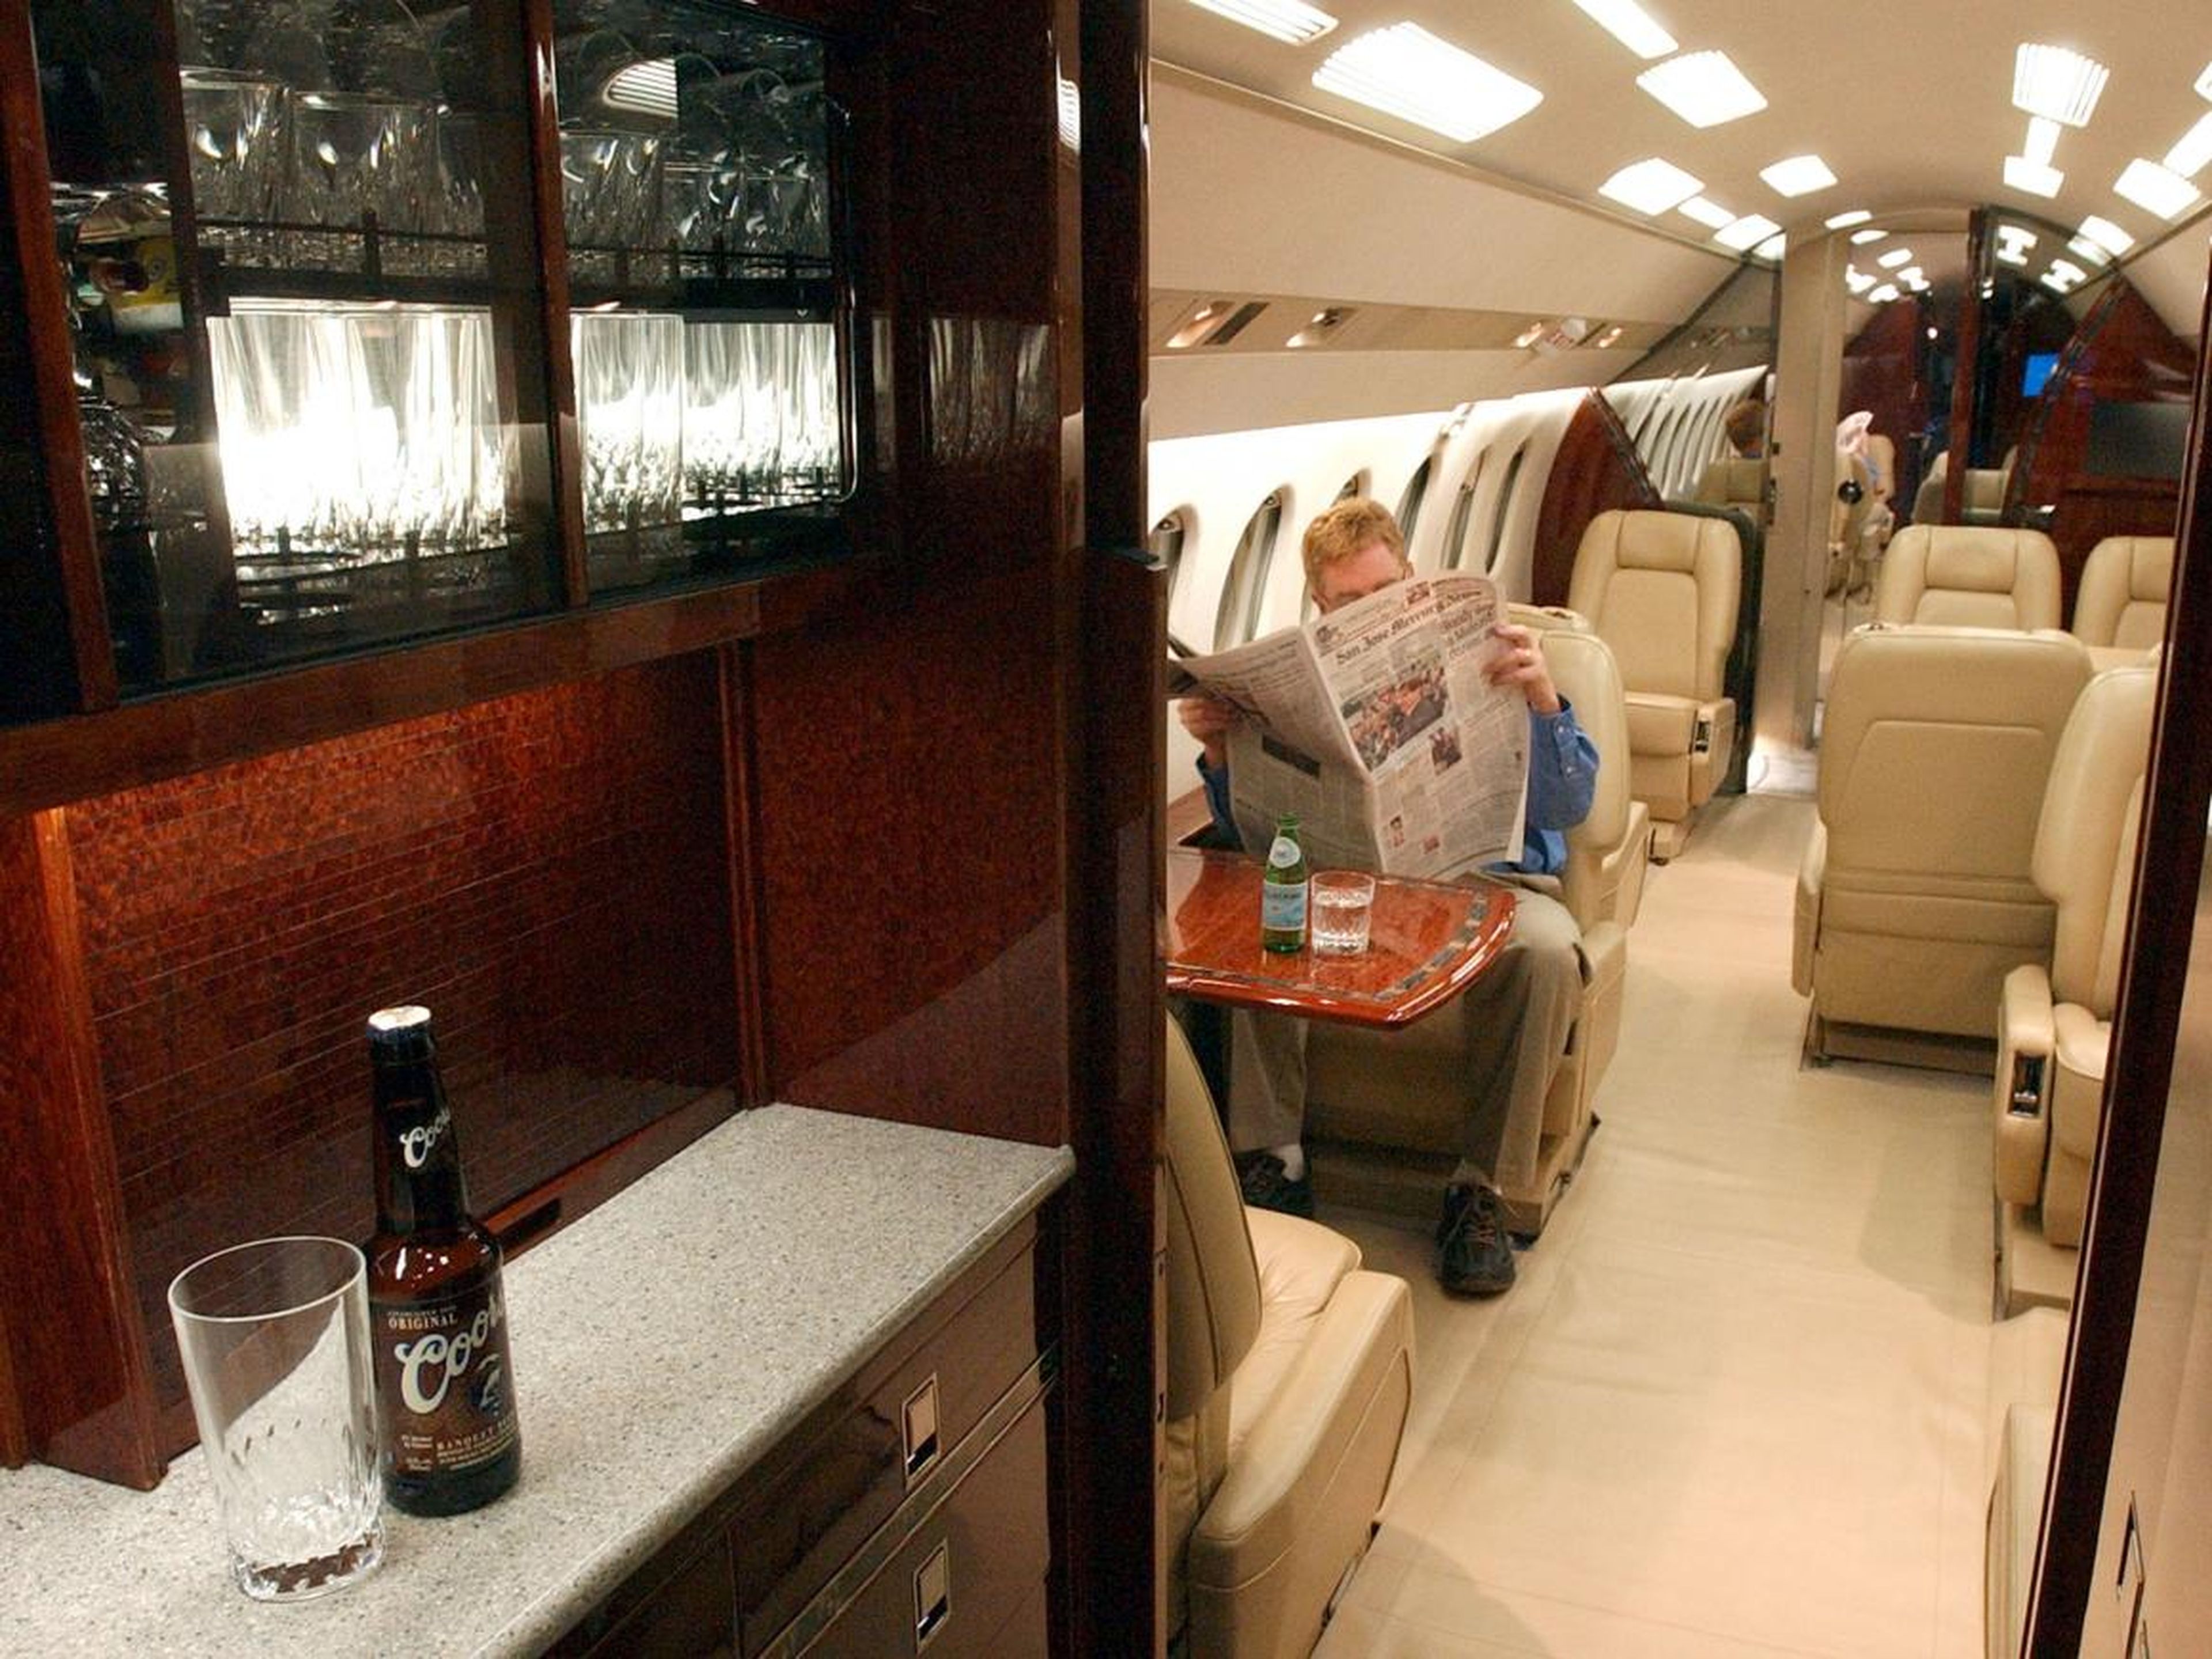 Most private planes seem to be outfitted with luxurious leather seats like the ones Zhang described.